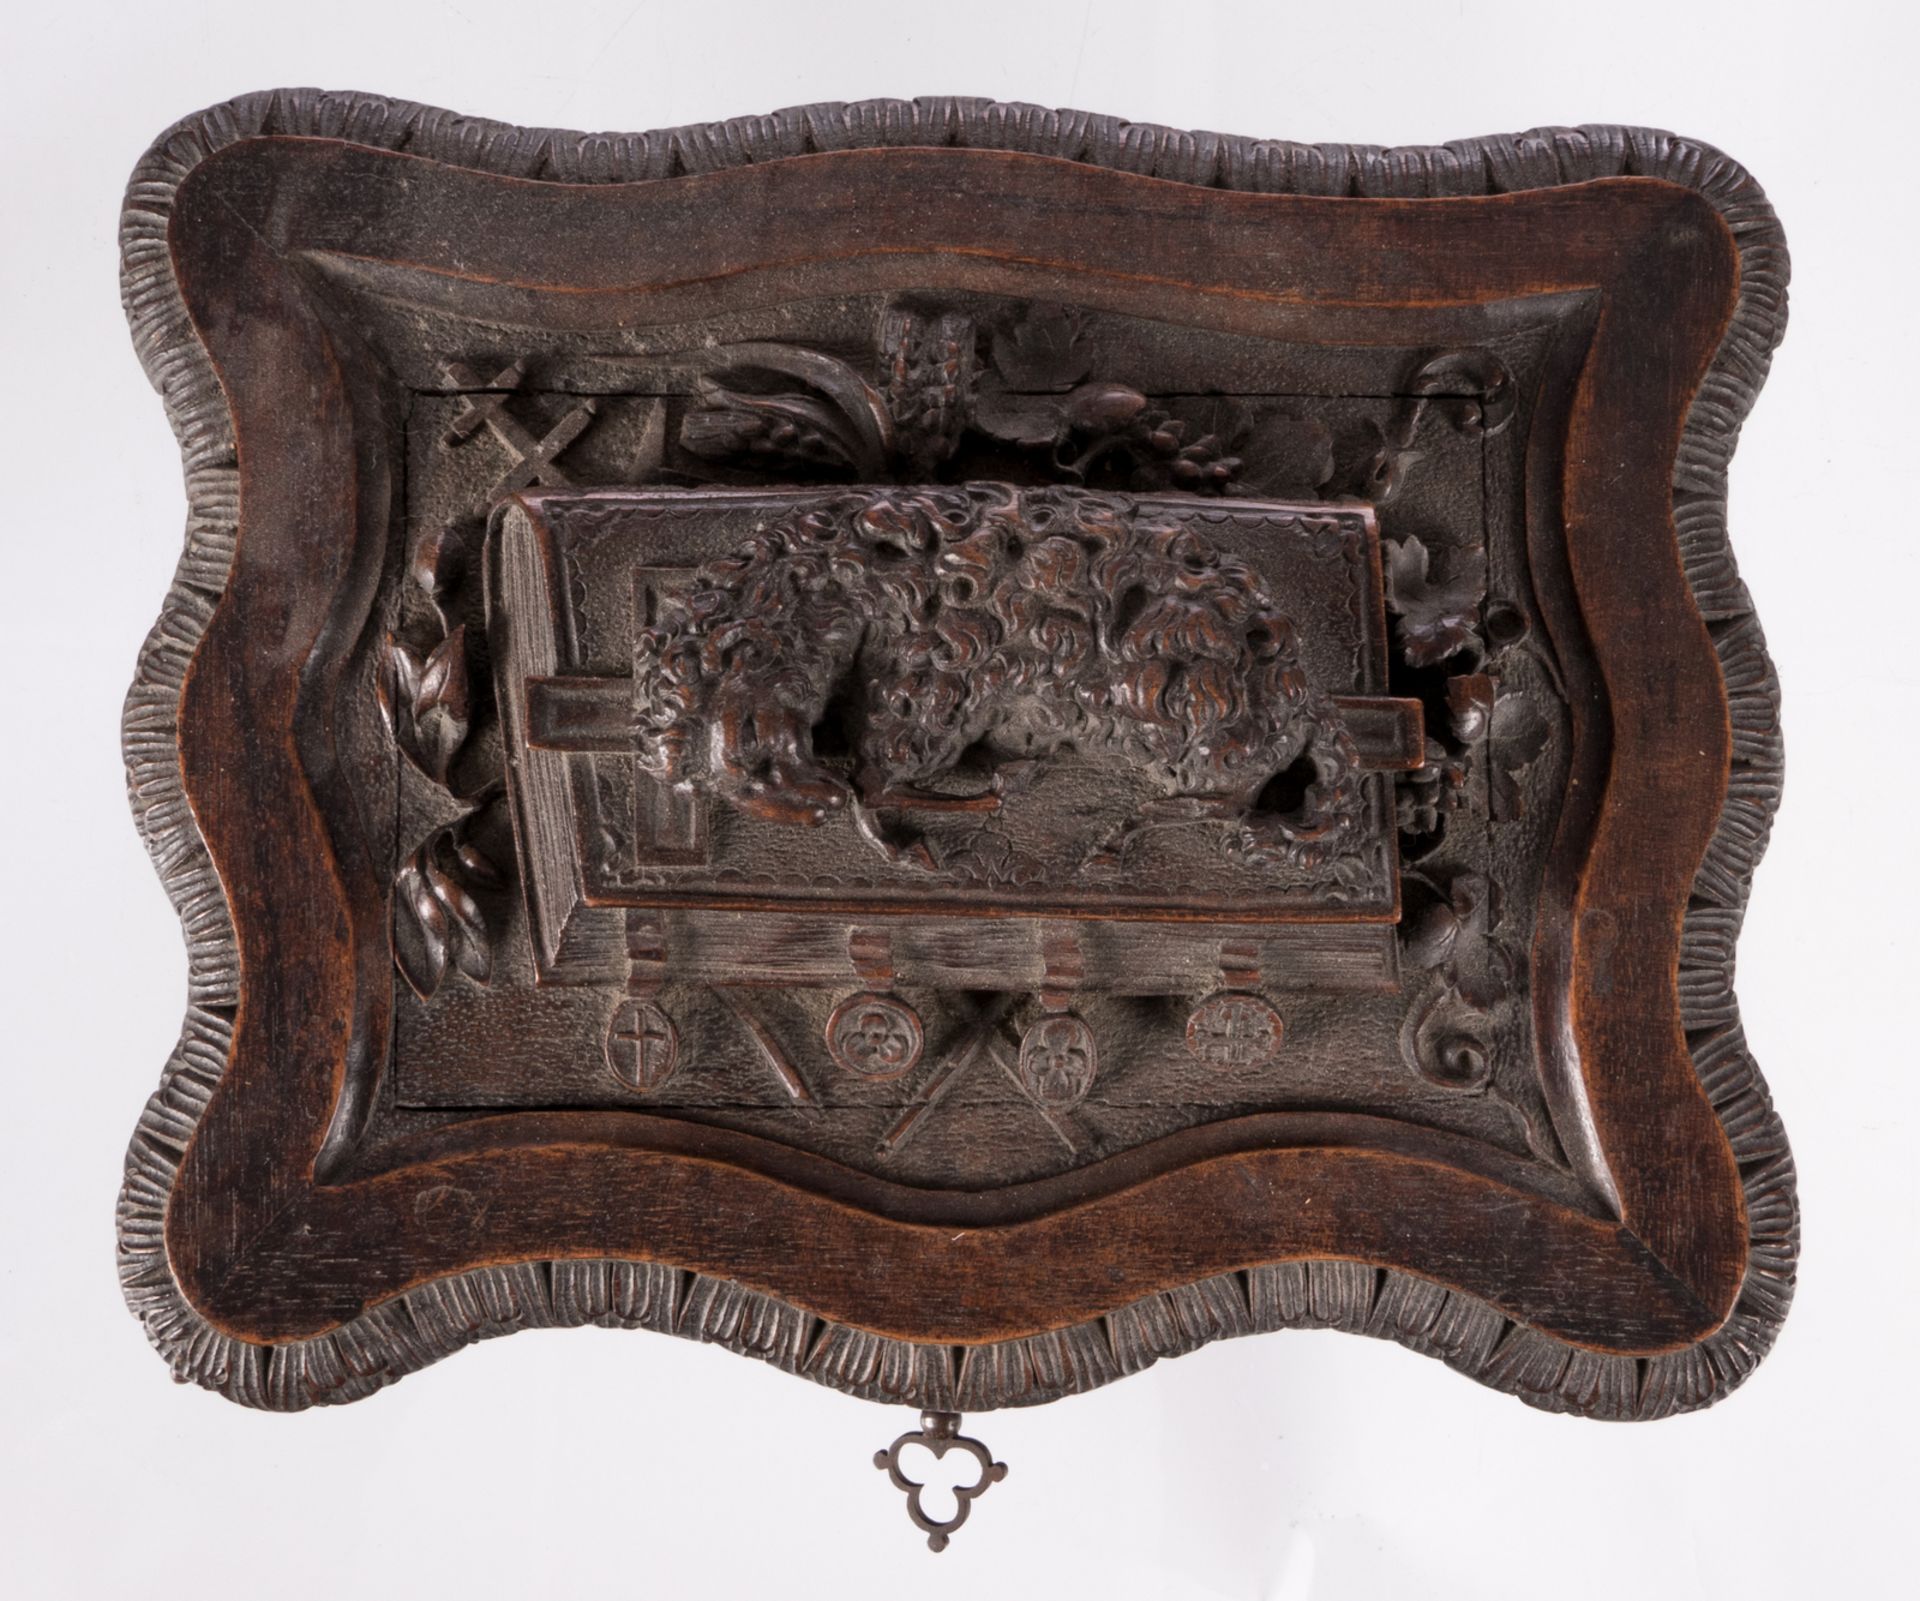 A sculpted walnut jewelry box decorated with religious symbols, H 16 - W 32 - D 26 cm - Bild 7 aus 11